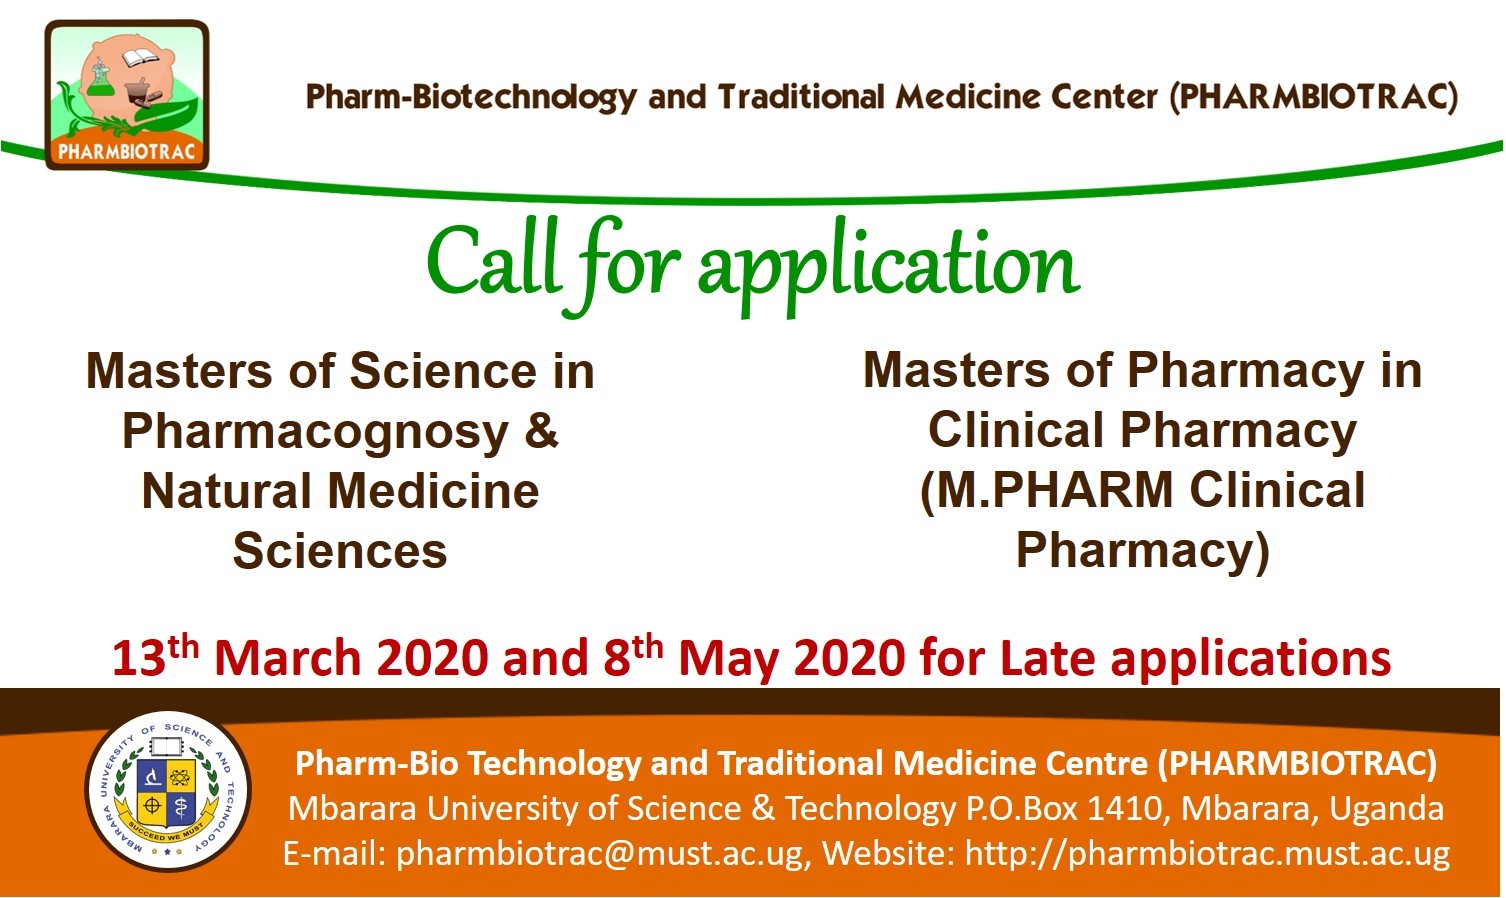 Call for Applicants for Masters of Pharmacy in Clinical Pharmacy (M.Pharm Clinical Pharmacy), Masters of Science in Pharmacognosy & Natural Medicine Sciences